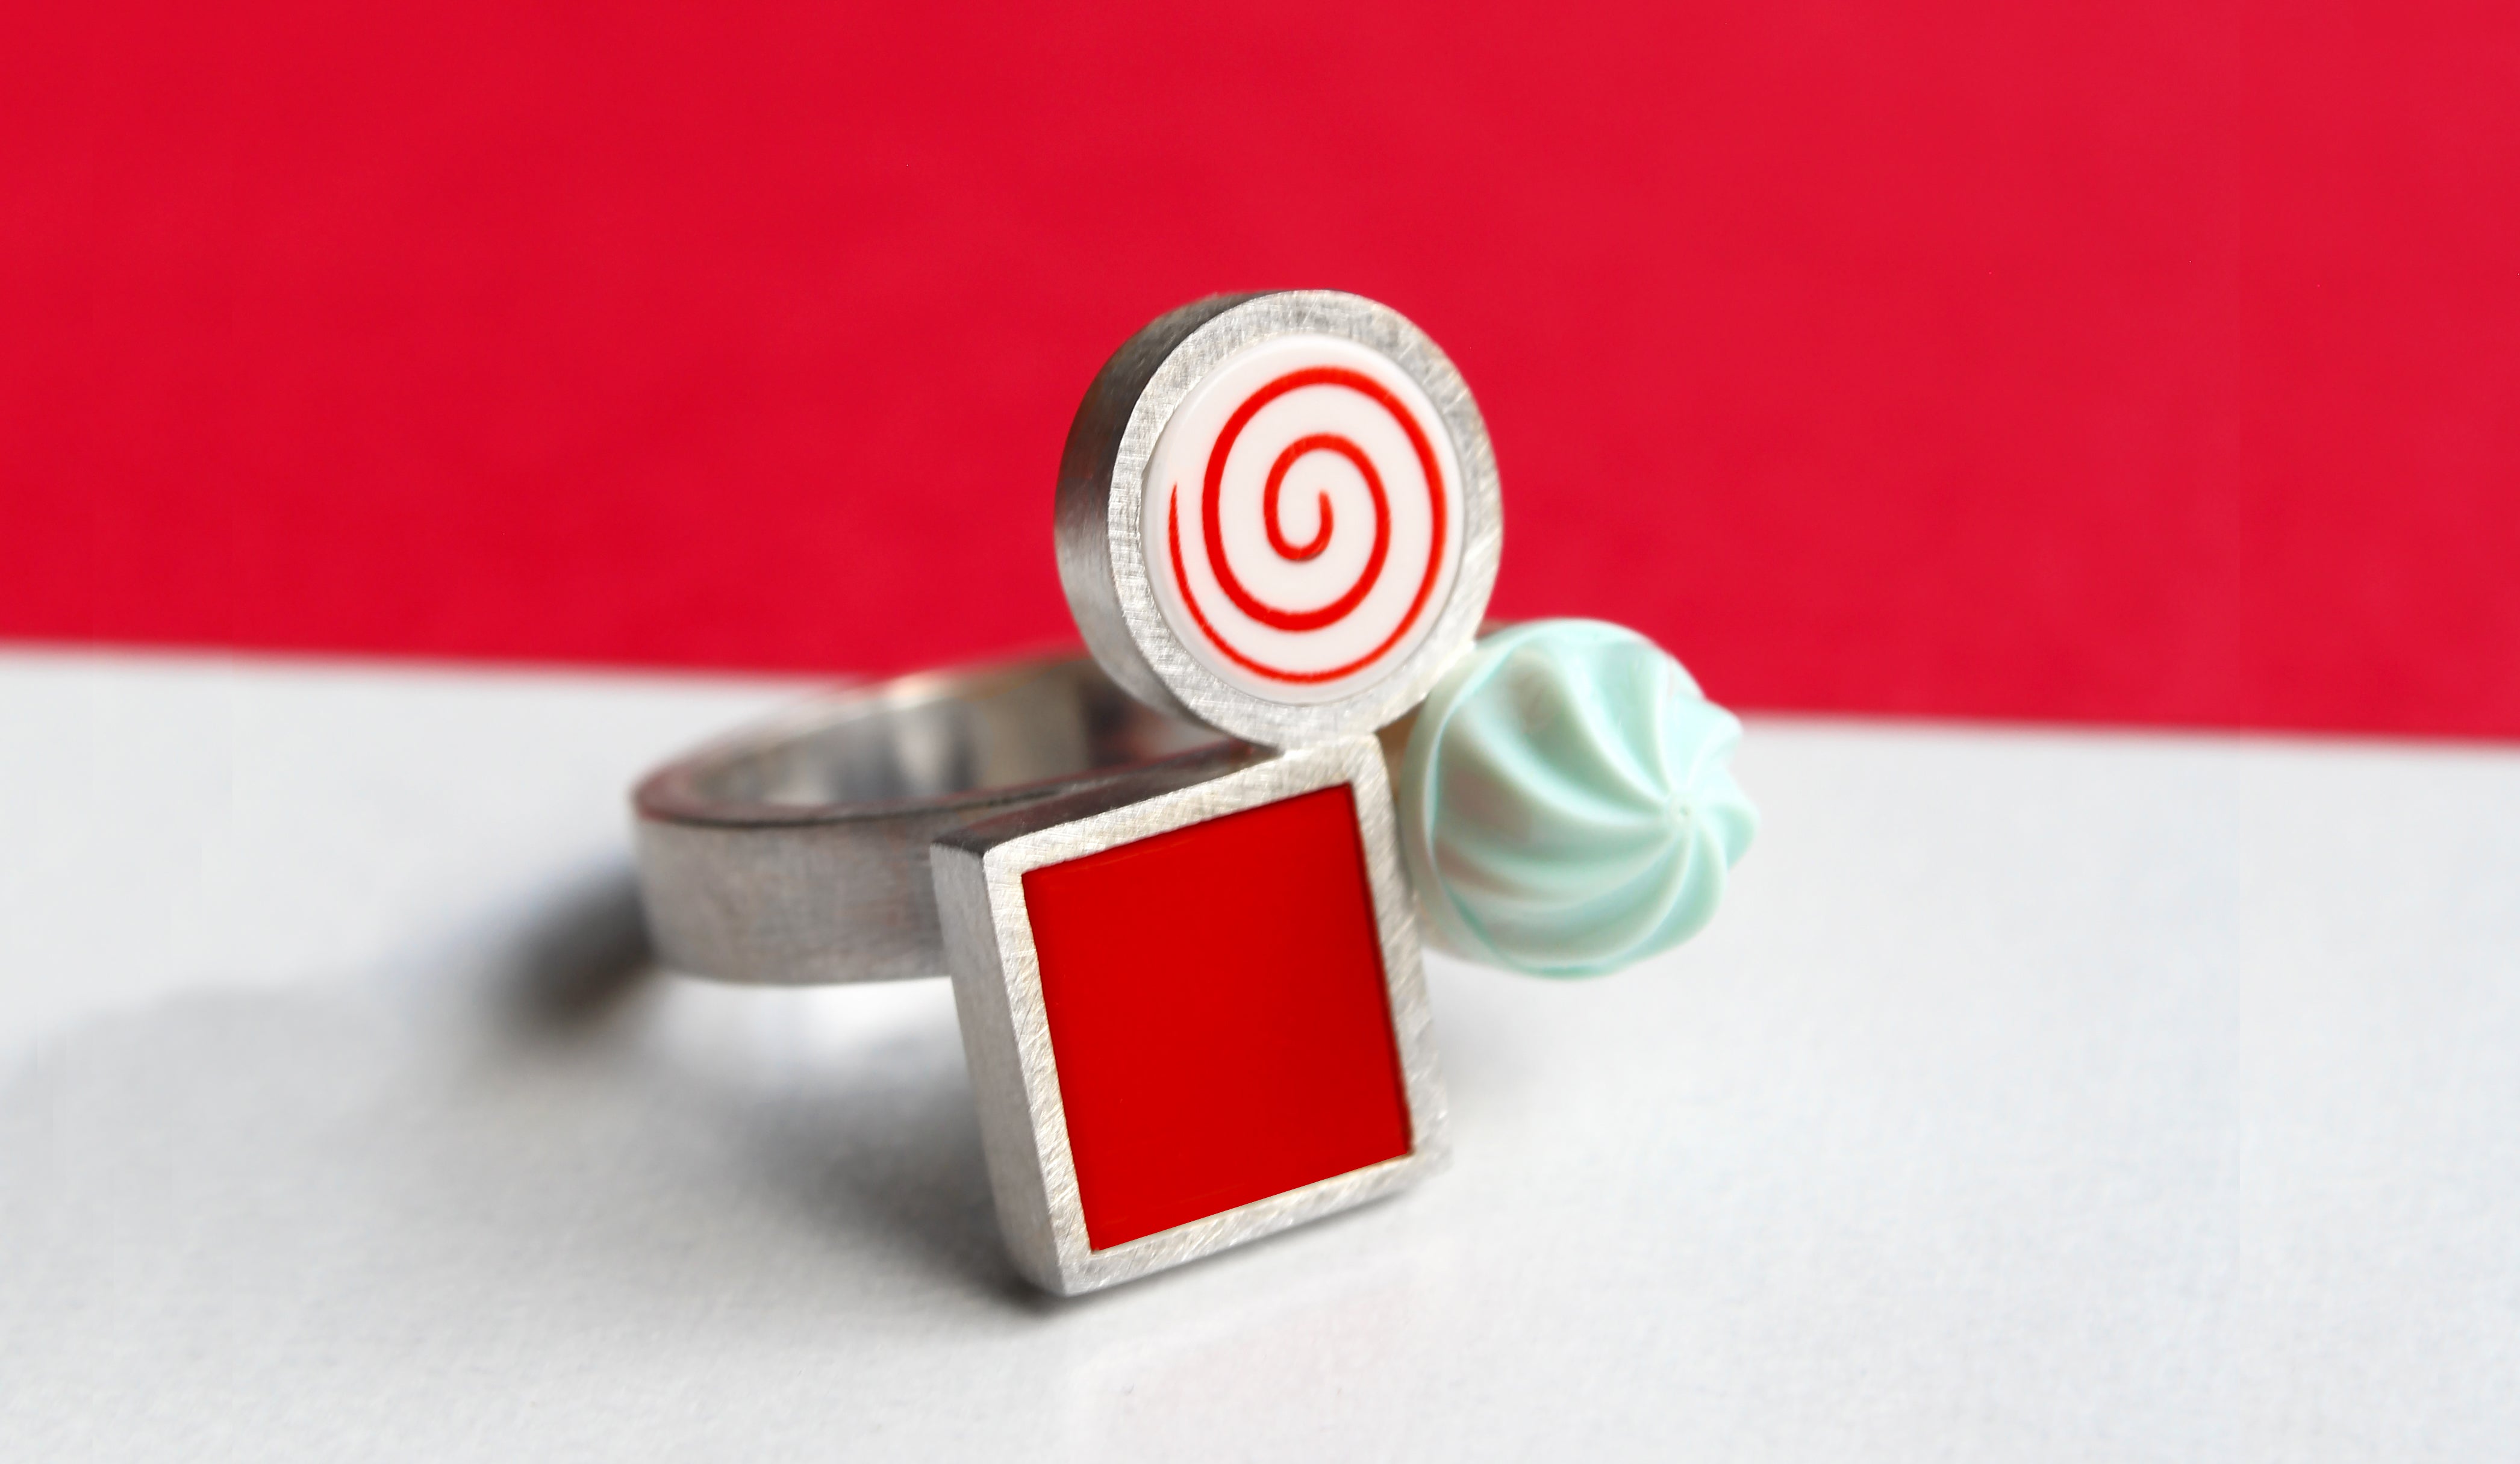 Colorful red ring made from lego pieces.